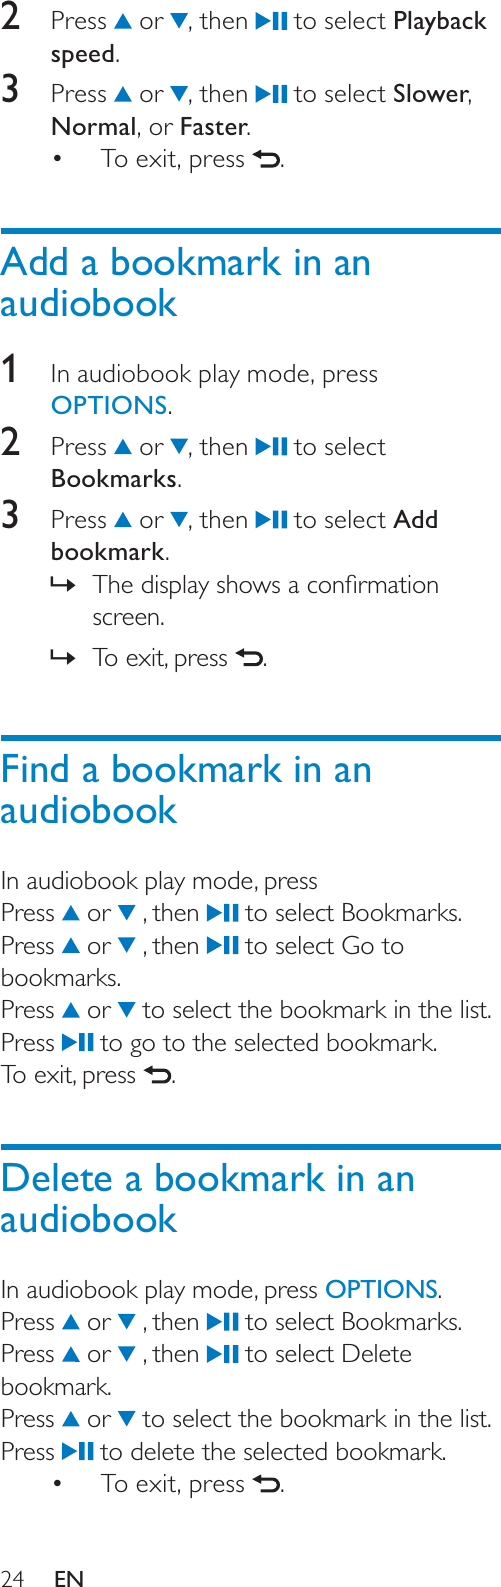 242 Press  or  , then   to select Playback speed.3 Press  or  , then   to select Slower,Normal, or Faster.To exit, press  .Add a bookmark in an audiobook1In audiobook play mode, press OPTIONS.2 Press  or  , then   to select Bookmarks.3 Press  or  , then   to select Add bookmark.7KHGLVSOD\VKRZVDFRQÀUPDWLRQ»screen.To exit, press ».Find a bookmark in an audiobookIn audiobook play mode, pressPress  or   , then   to select Bookmarks.Press  or   , then   to select Go to bookmarks.Press  or   to select the bookmark in the list.Press  to go to the selected bookmark.To exit, press  .Delete a bookmark in an audiobookIn audiobook play mode, press OPTIONS.Press  or   , then   to select Bookmarks.Press  or   , then   to select Delete bookmark.Press  or   to select the bookmark in the list.Press  to delete the selected bookmark.To exit, press  .EN